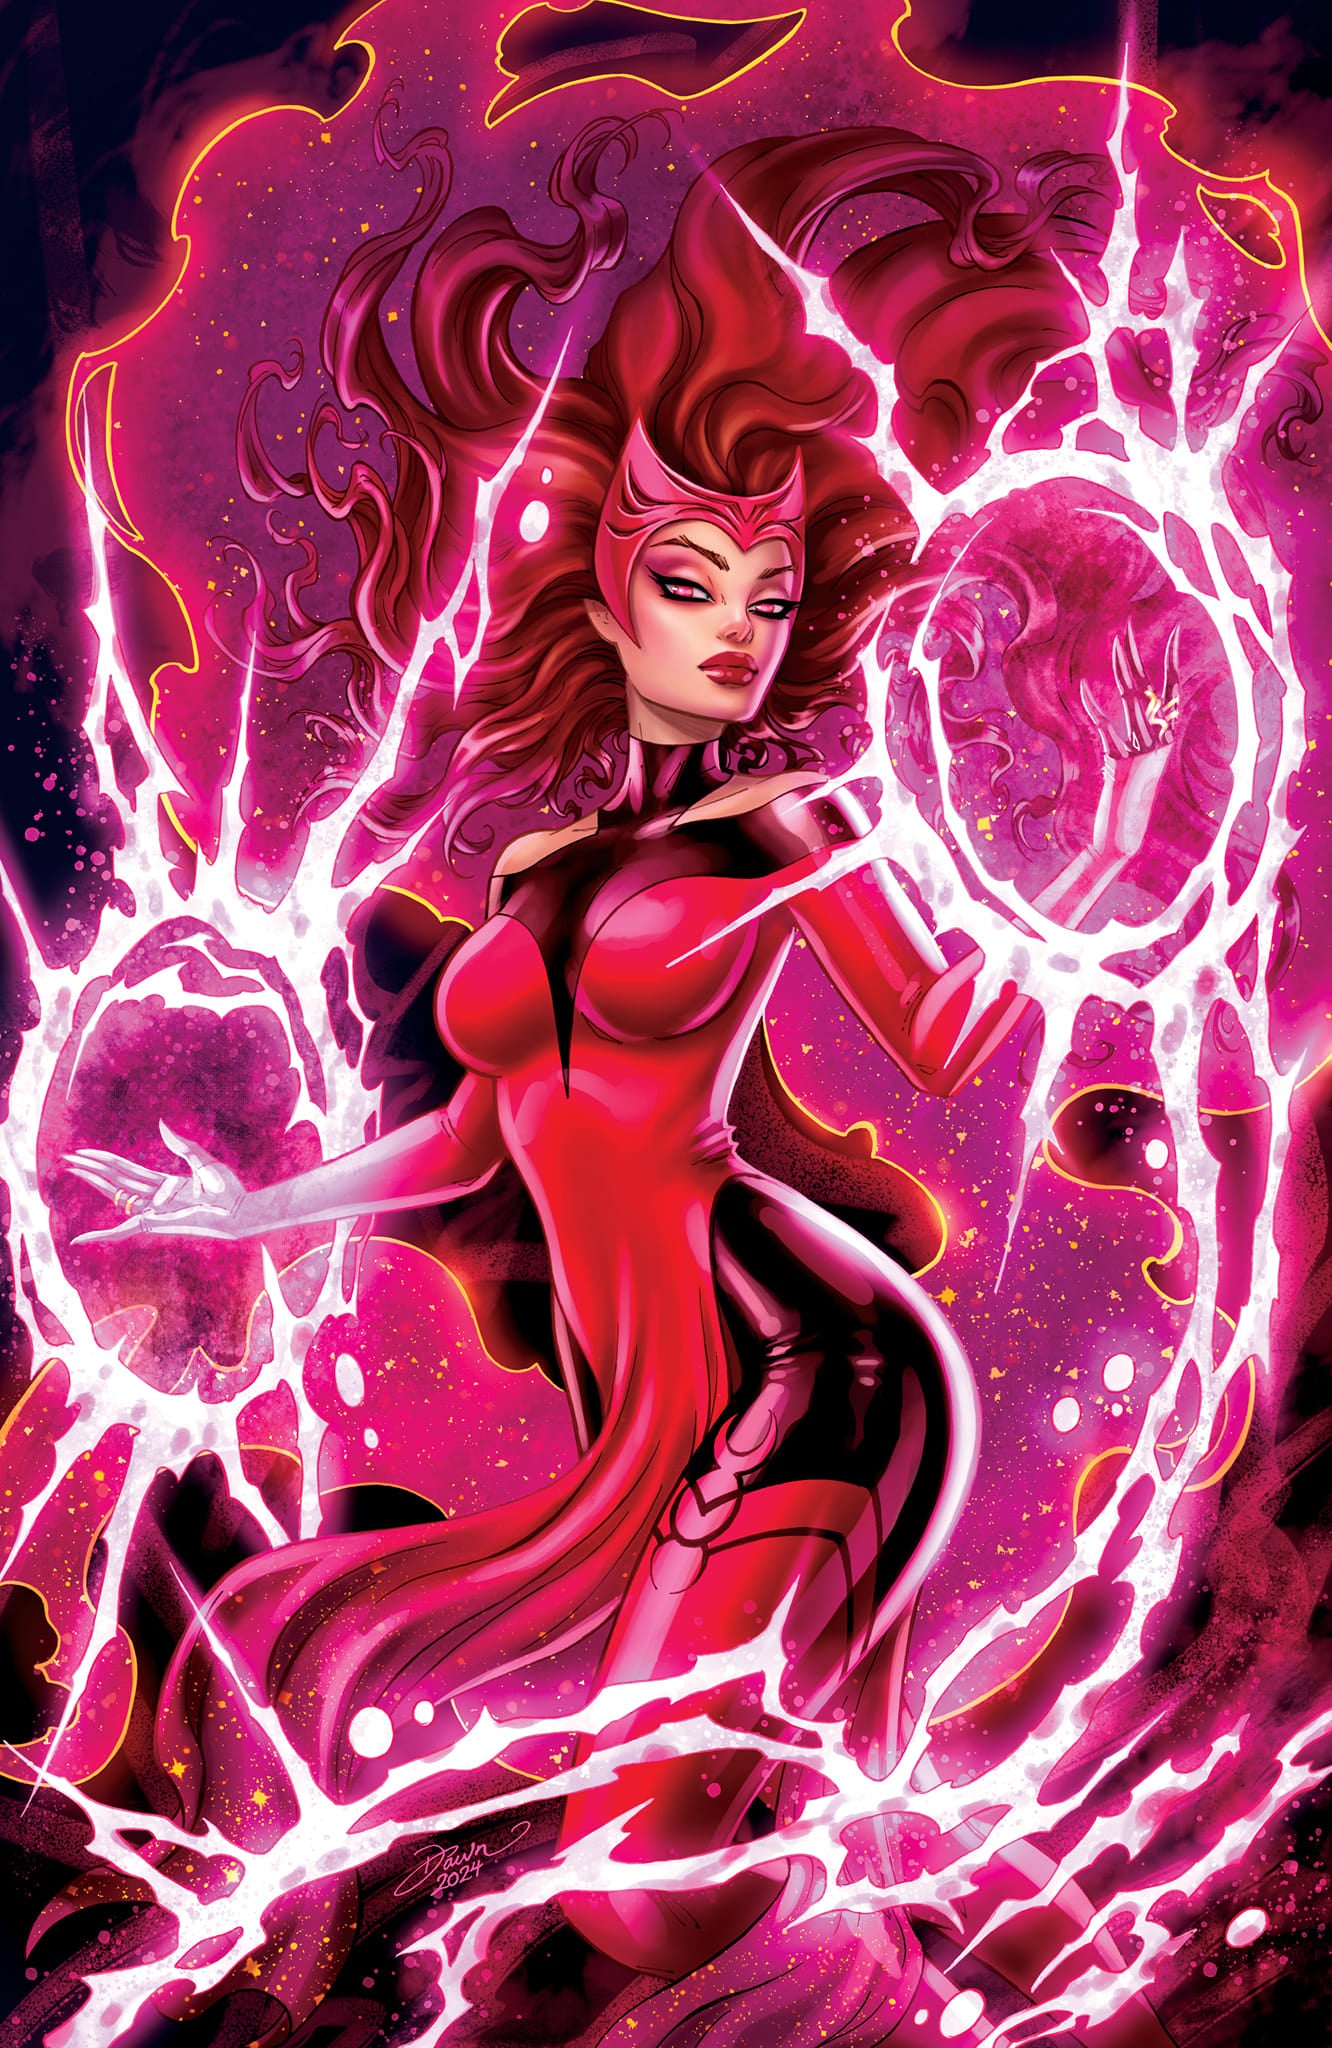 SCARLET WITCH #1 DAWN MCTEIGUE FIRST MARVEL COMICS EXCLUSIVE VARIANT OPTIONS06-12-24